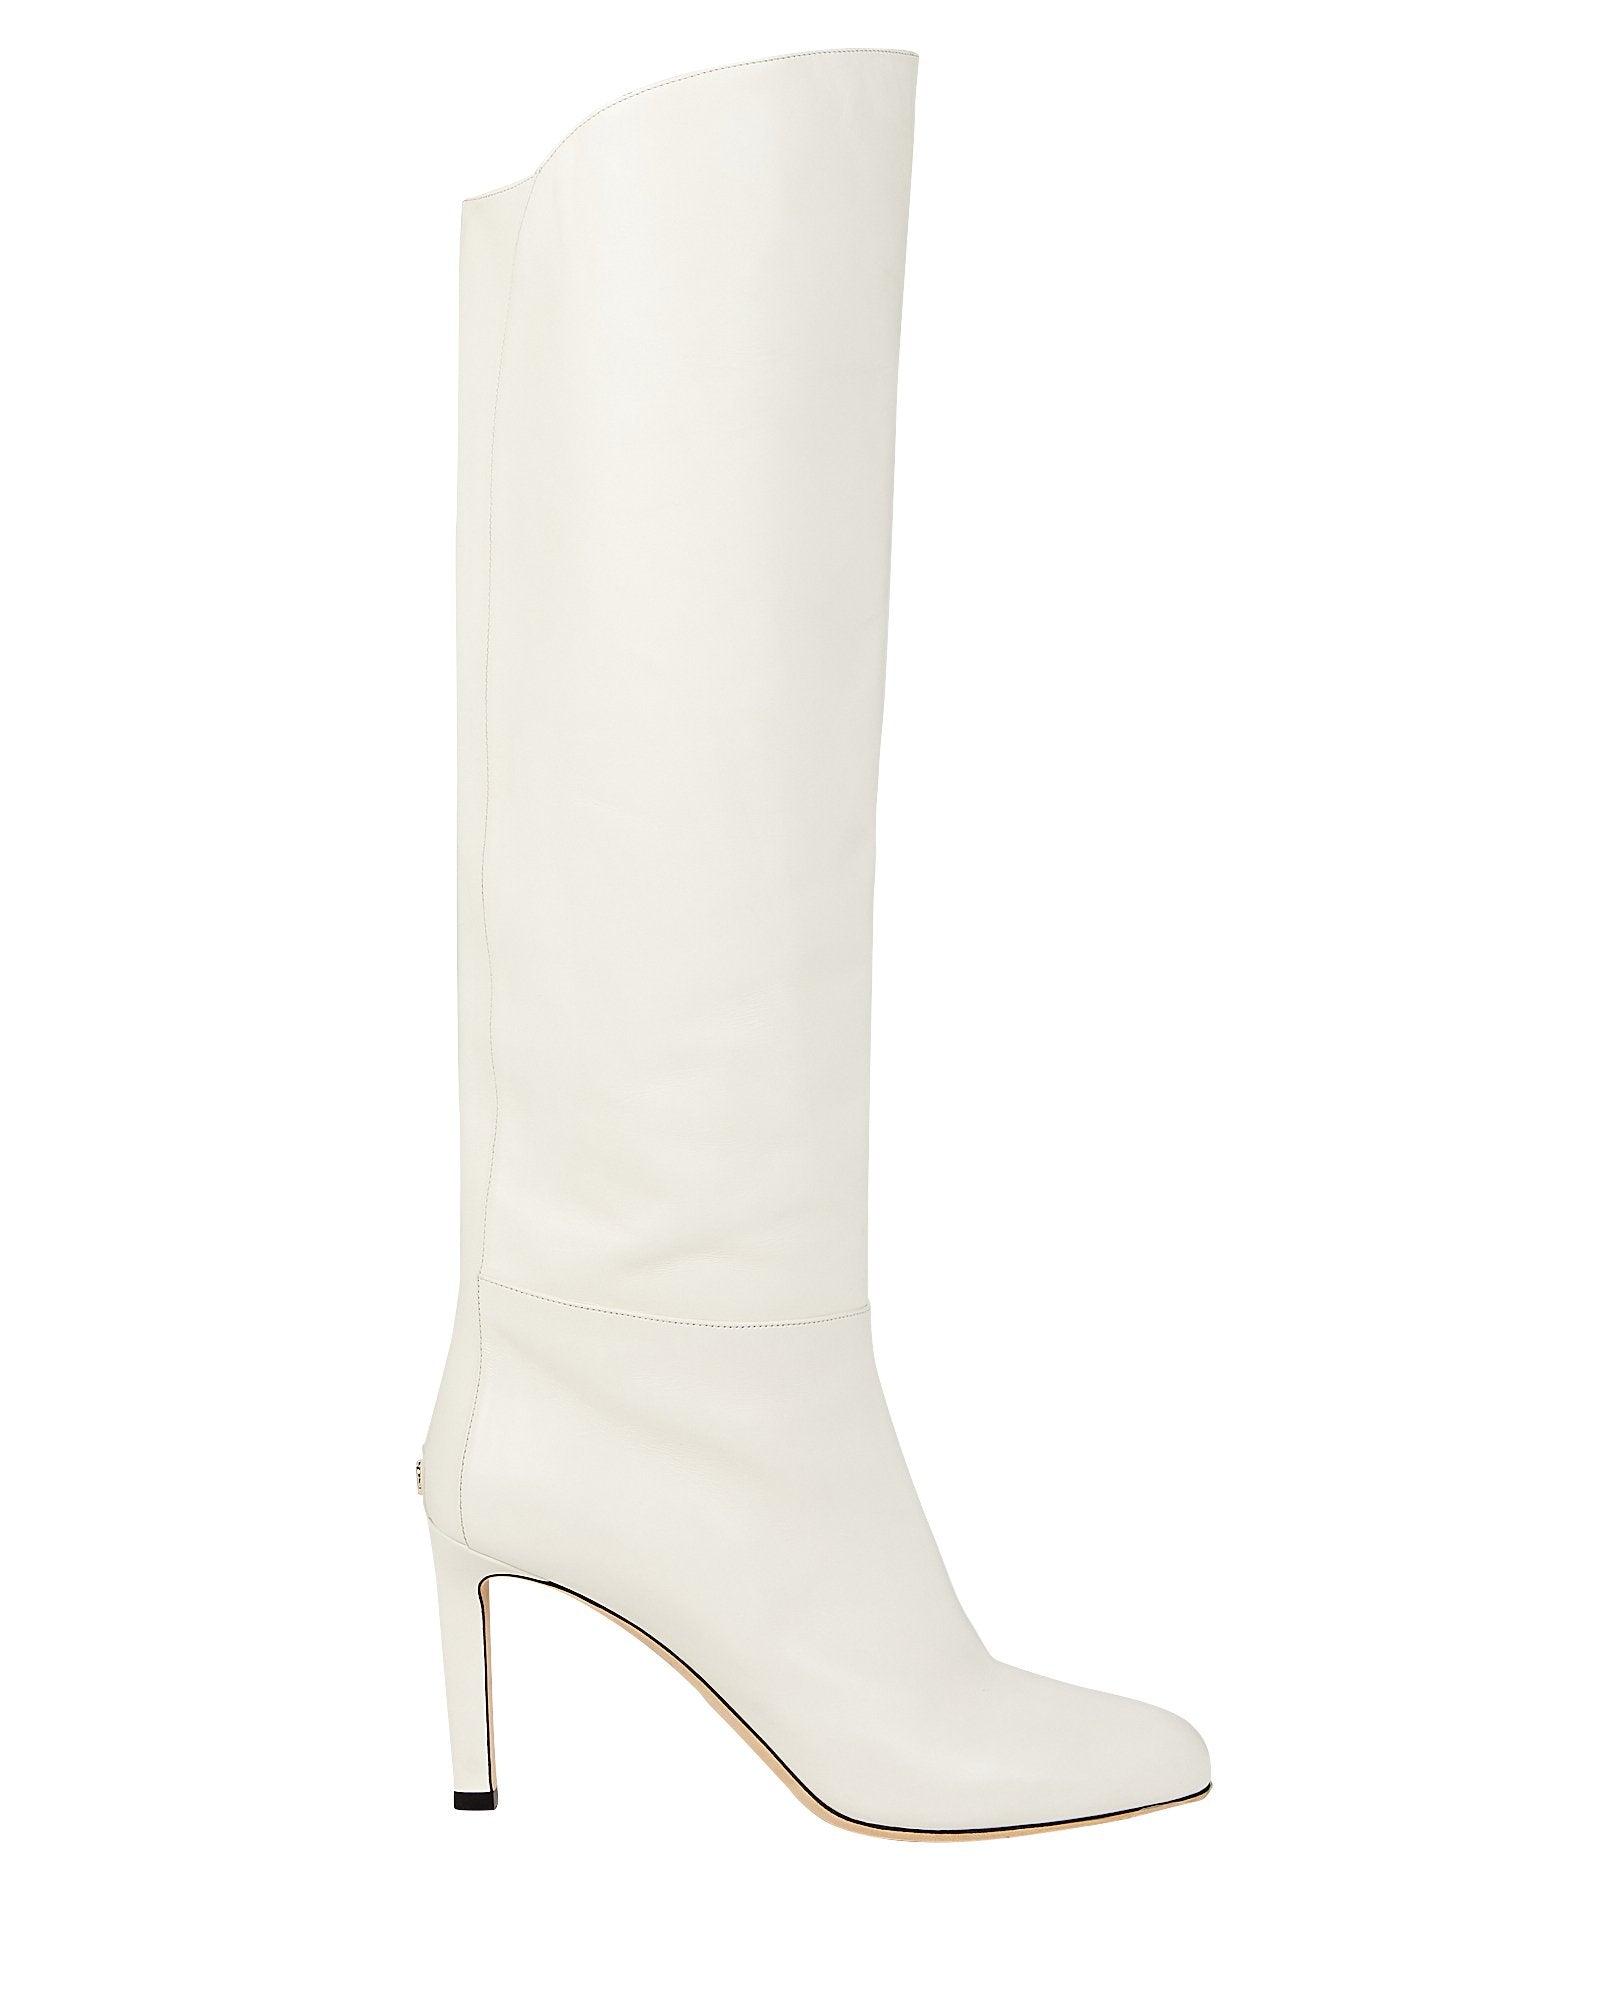 Jimmy Choo Karter 85 Leather Knee-high Boots in White | Lyst